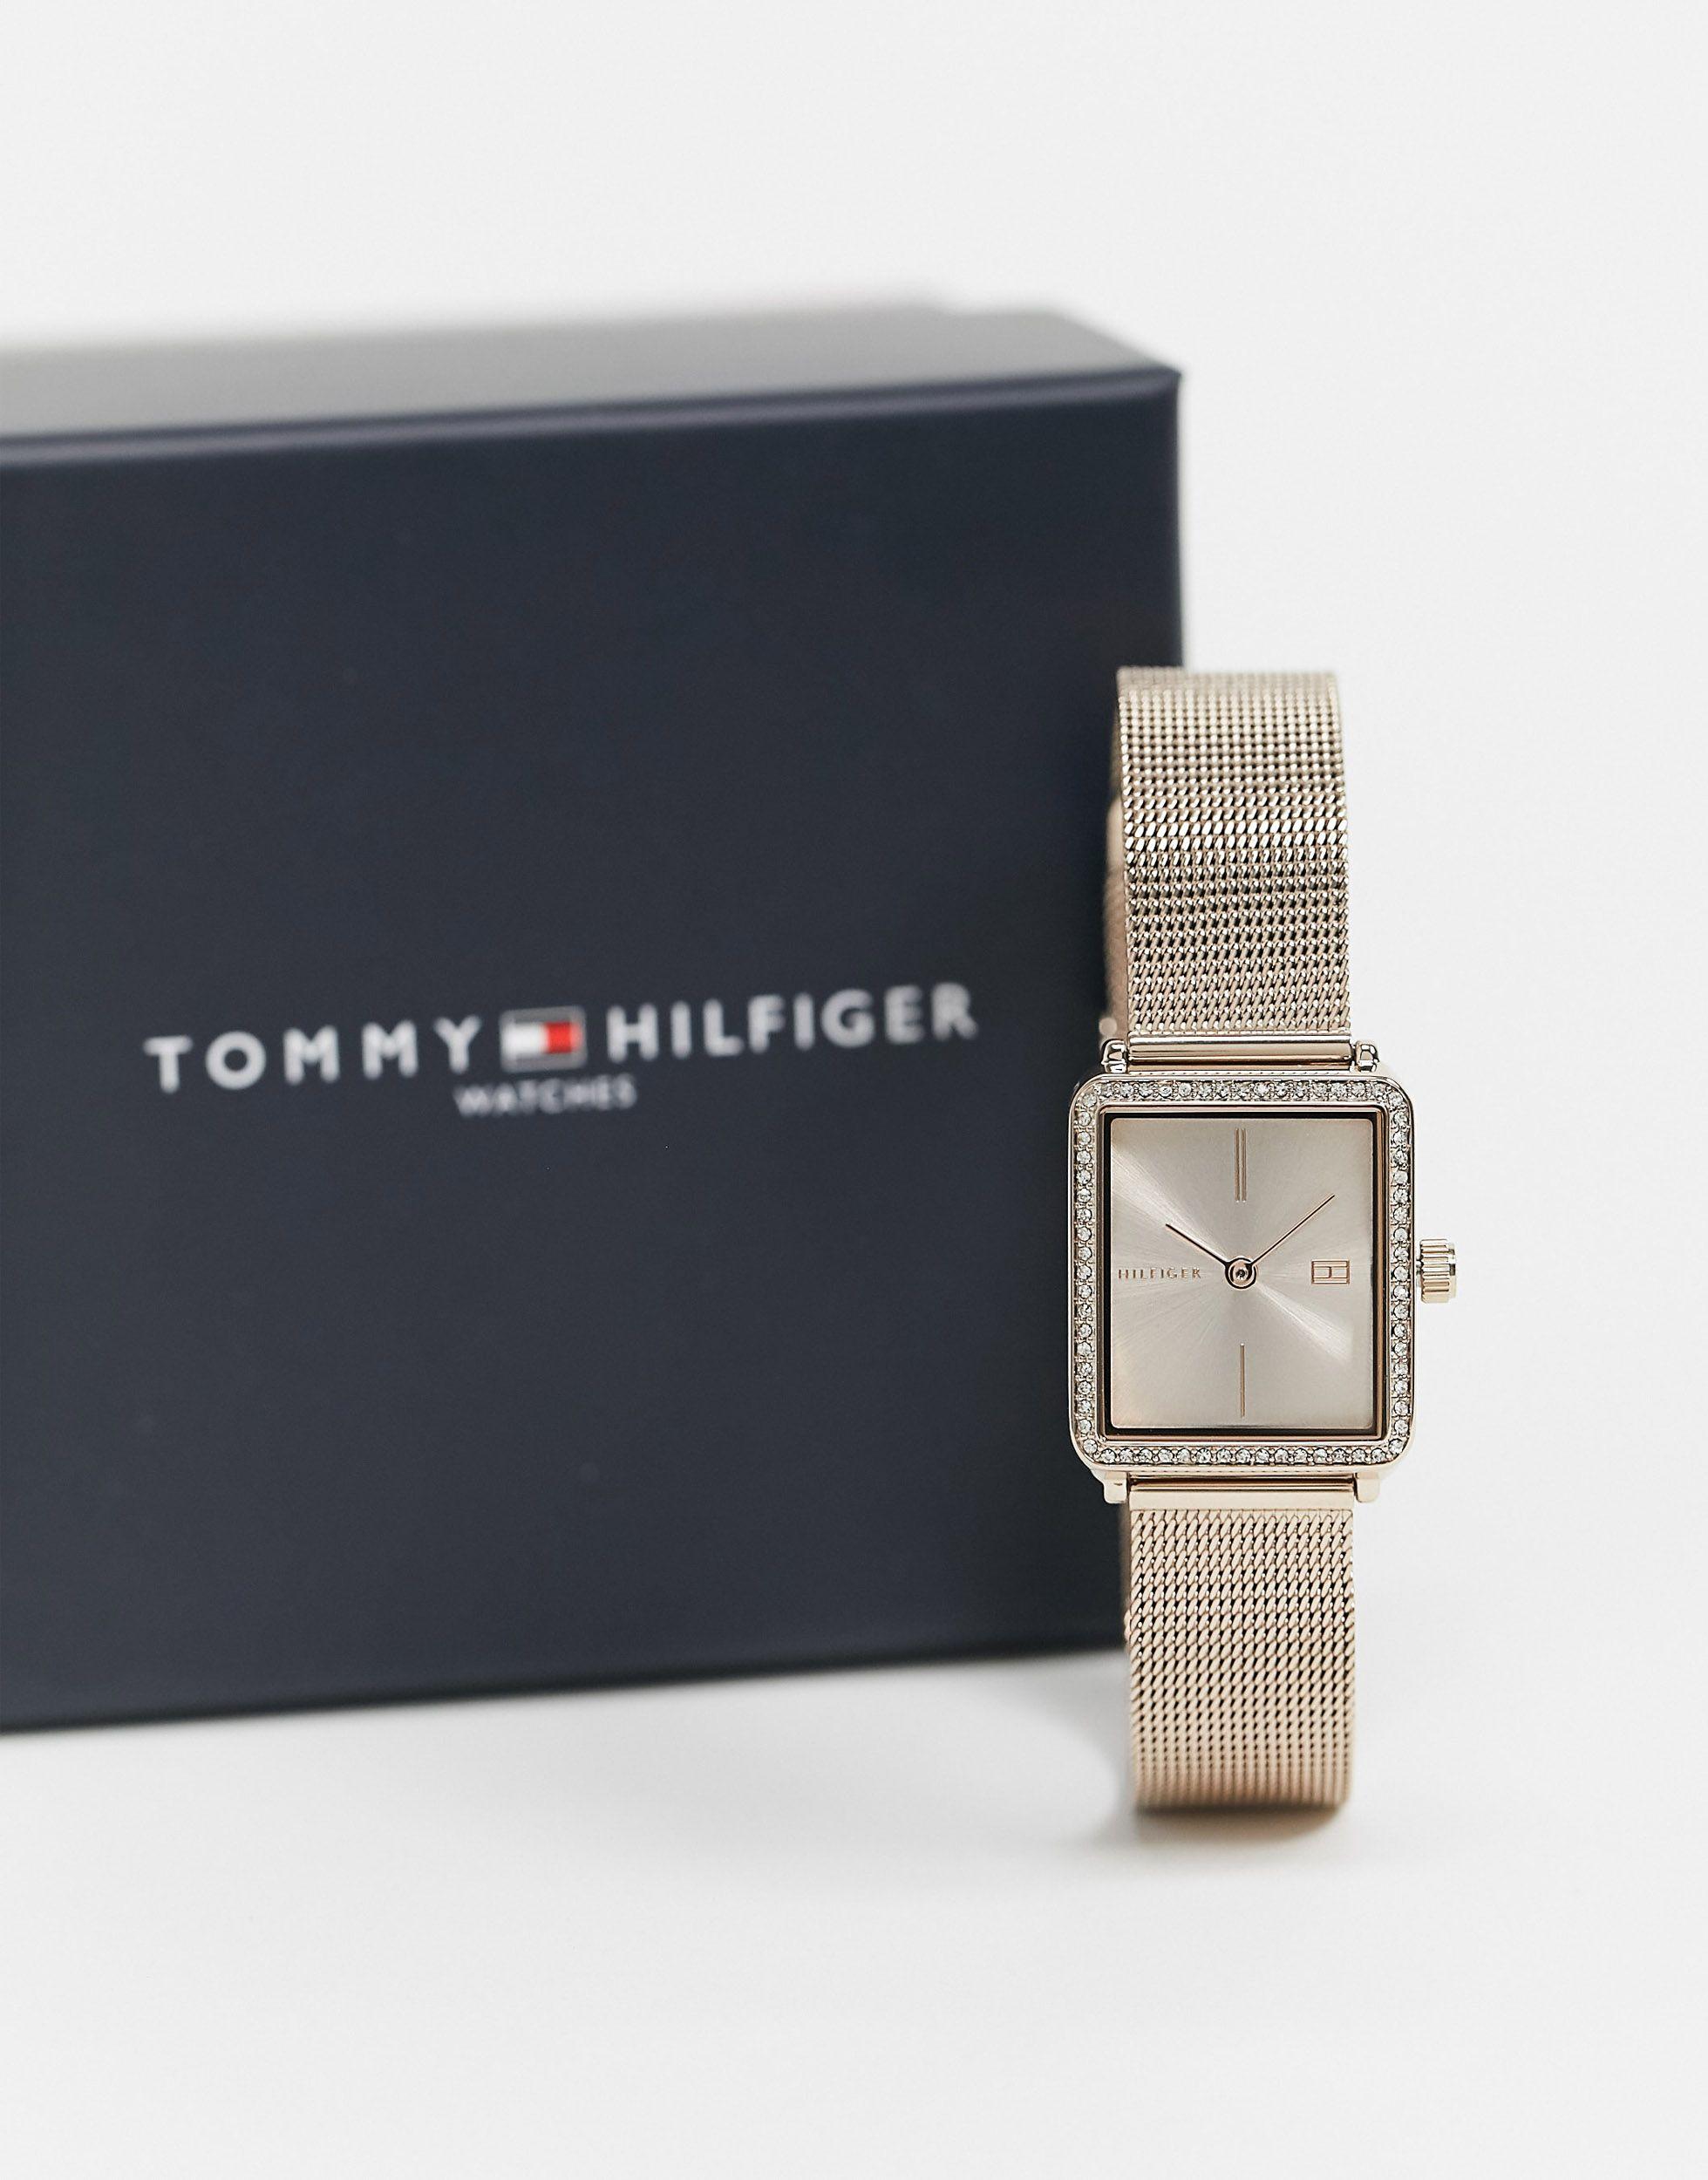 Tommy Hilfiger Square Mesh Watch in Gold (Metallic) - Lyst